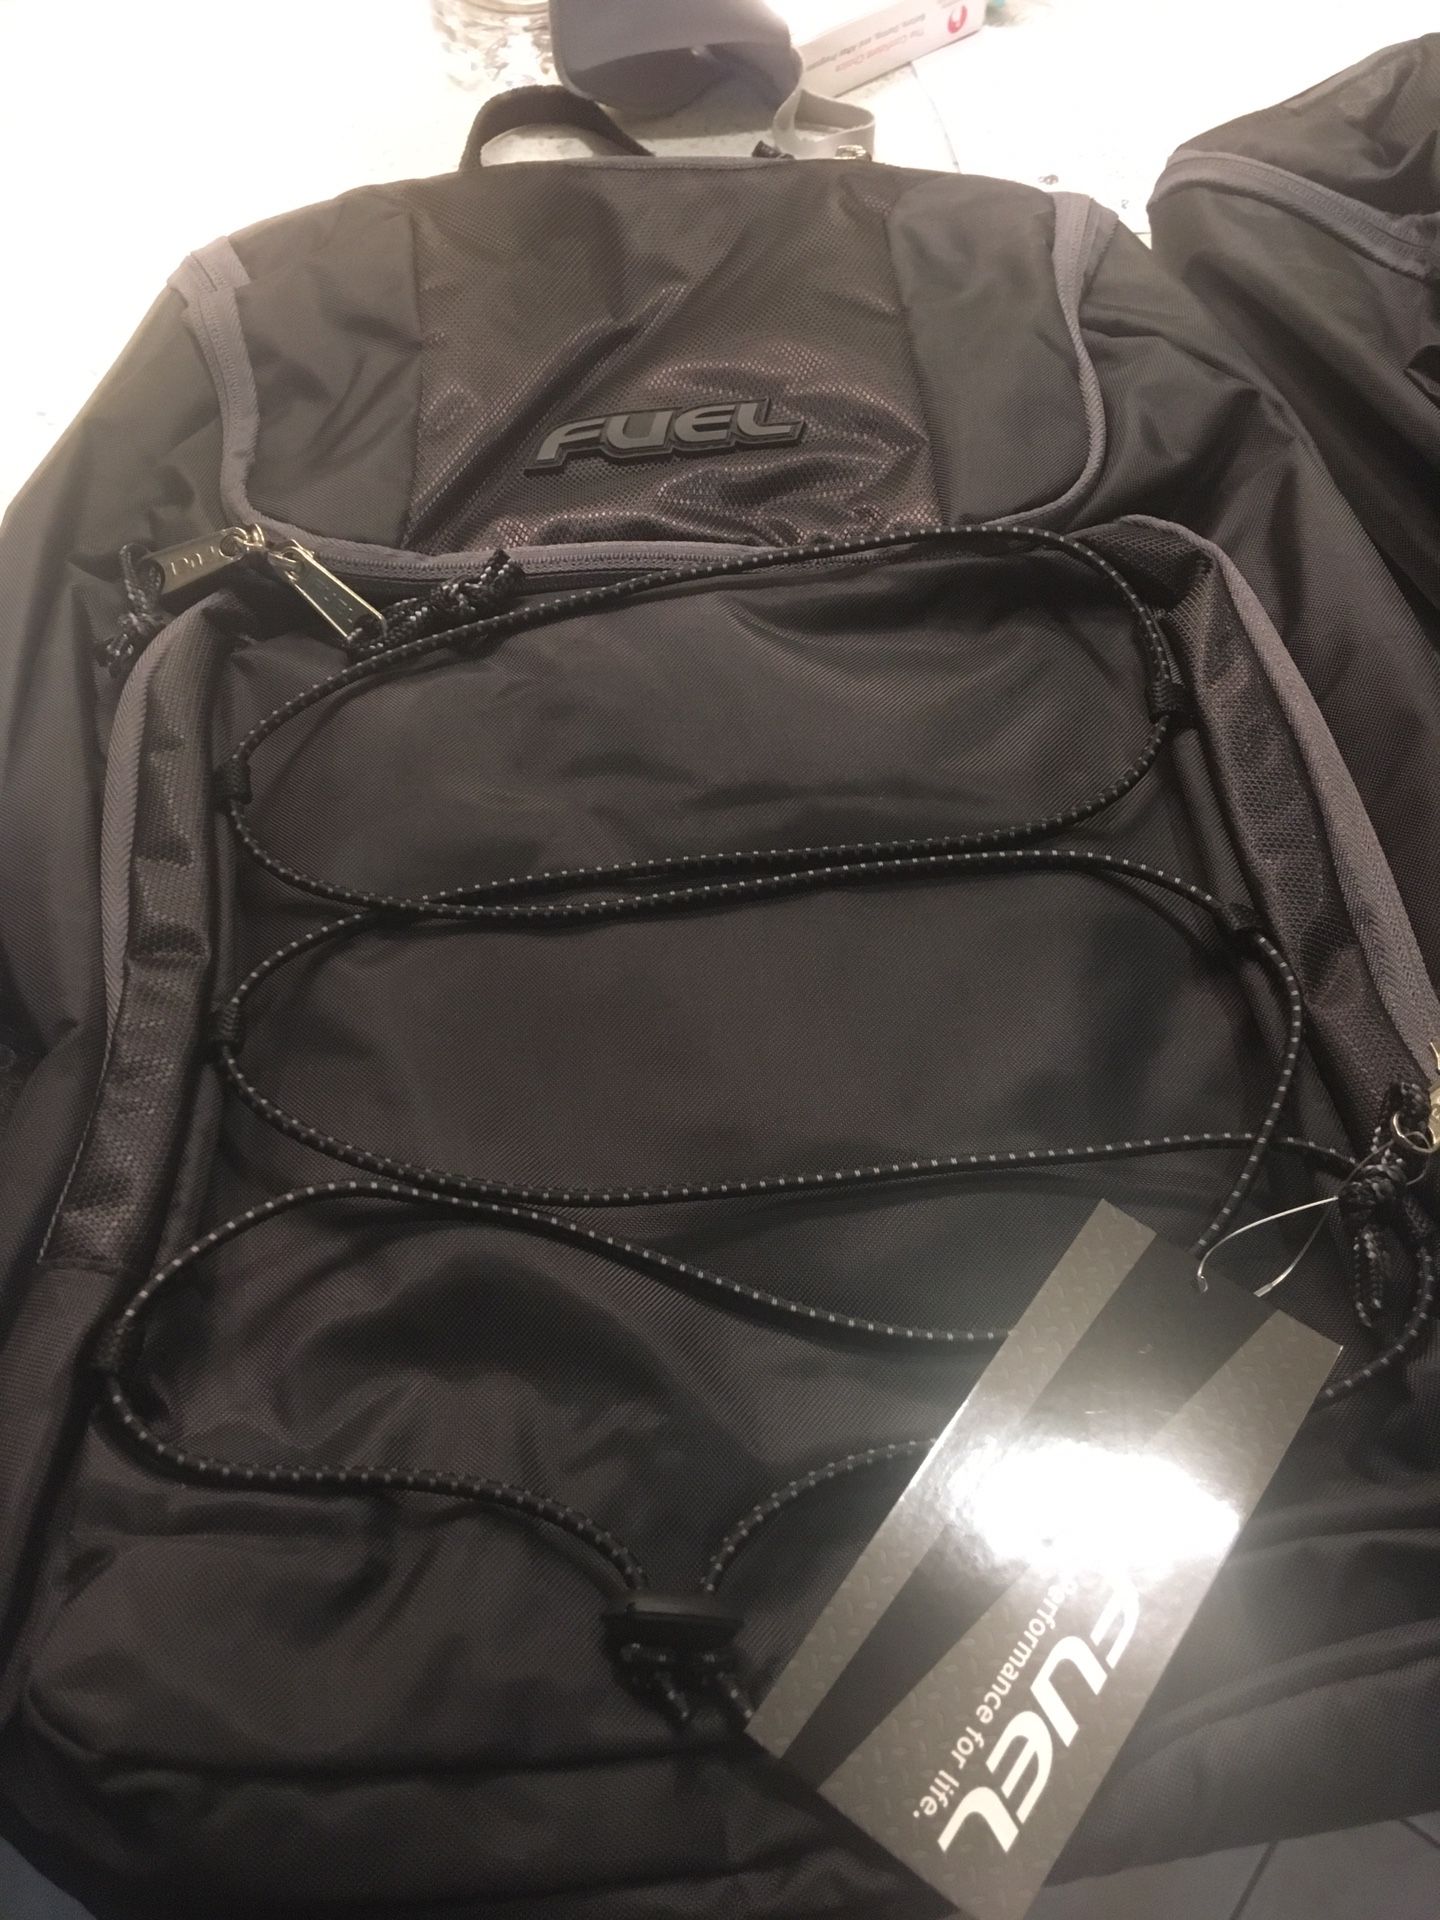 Brand New Fuel Backpack